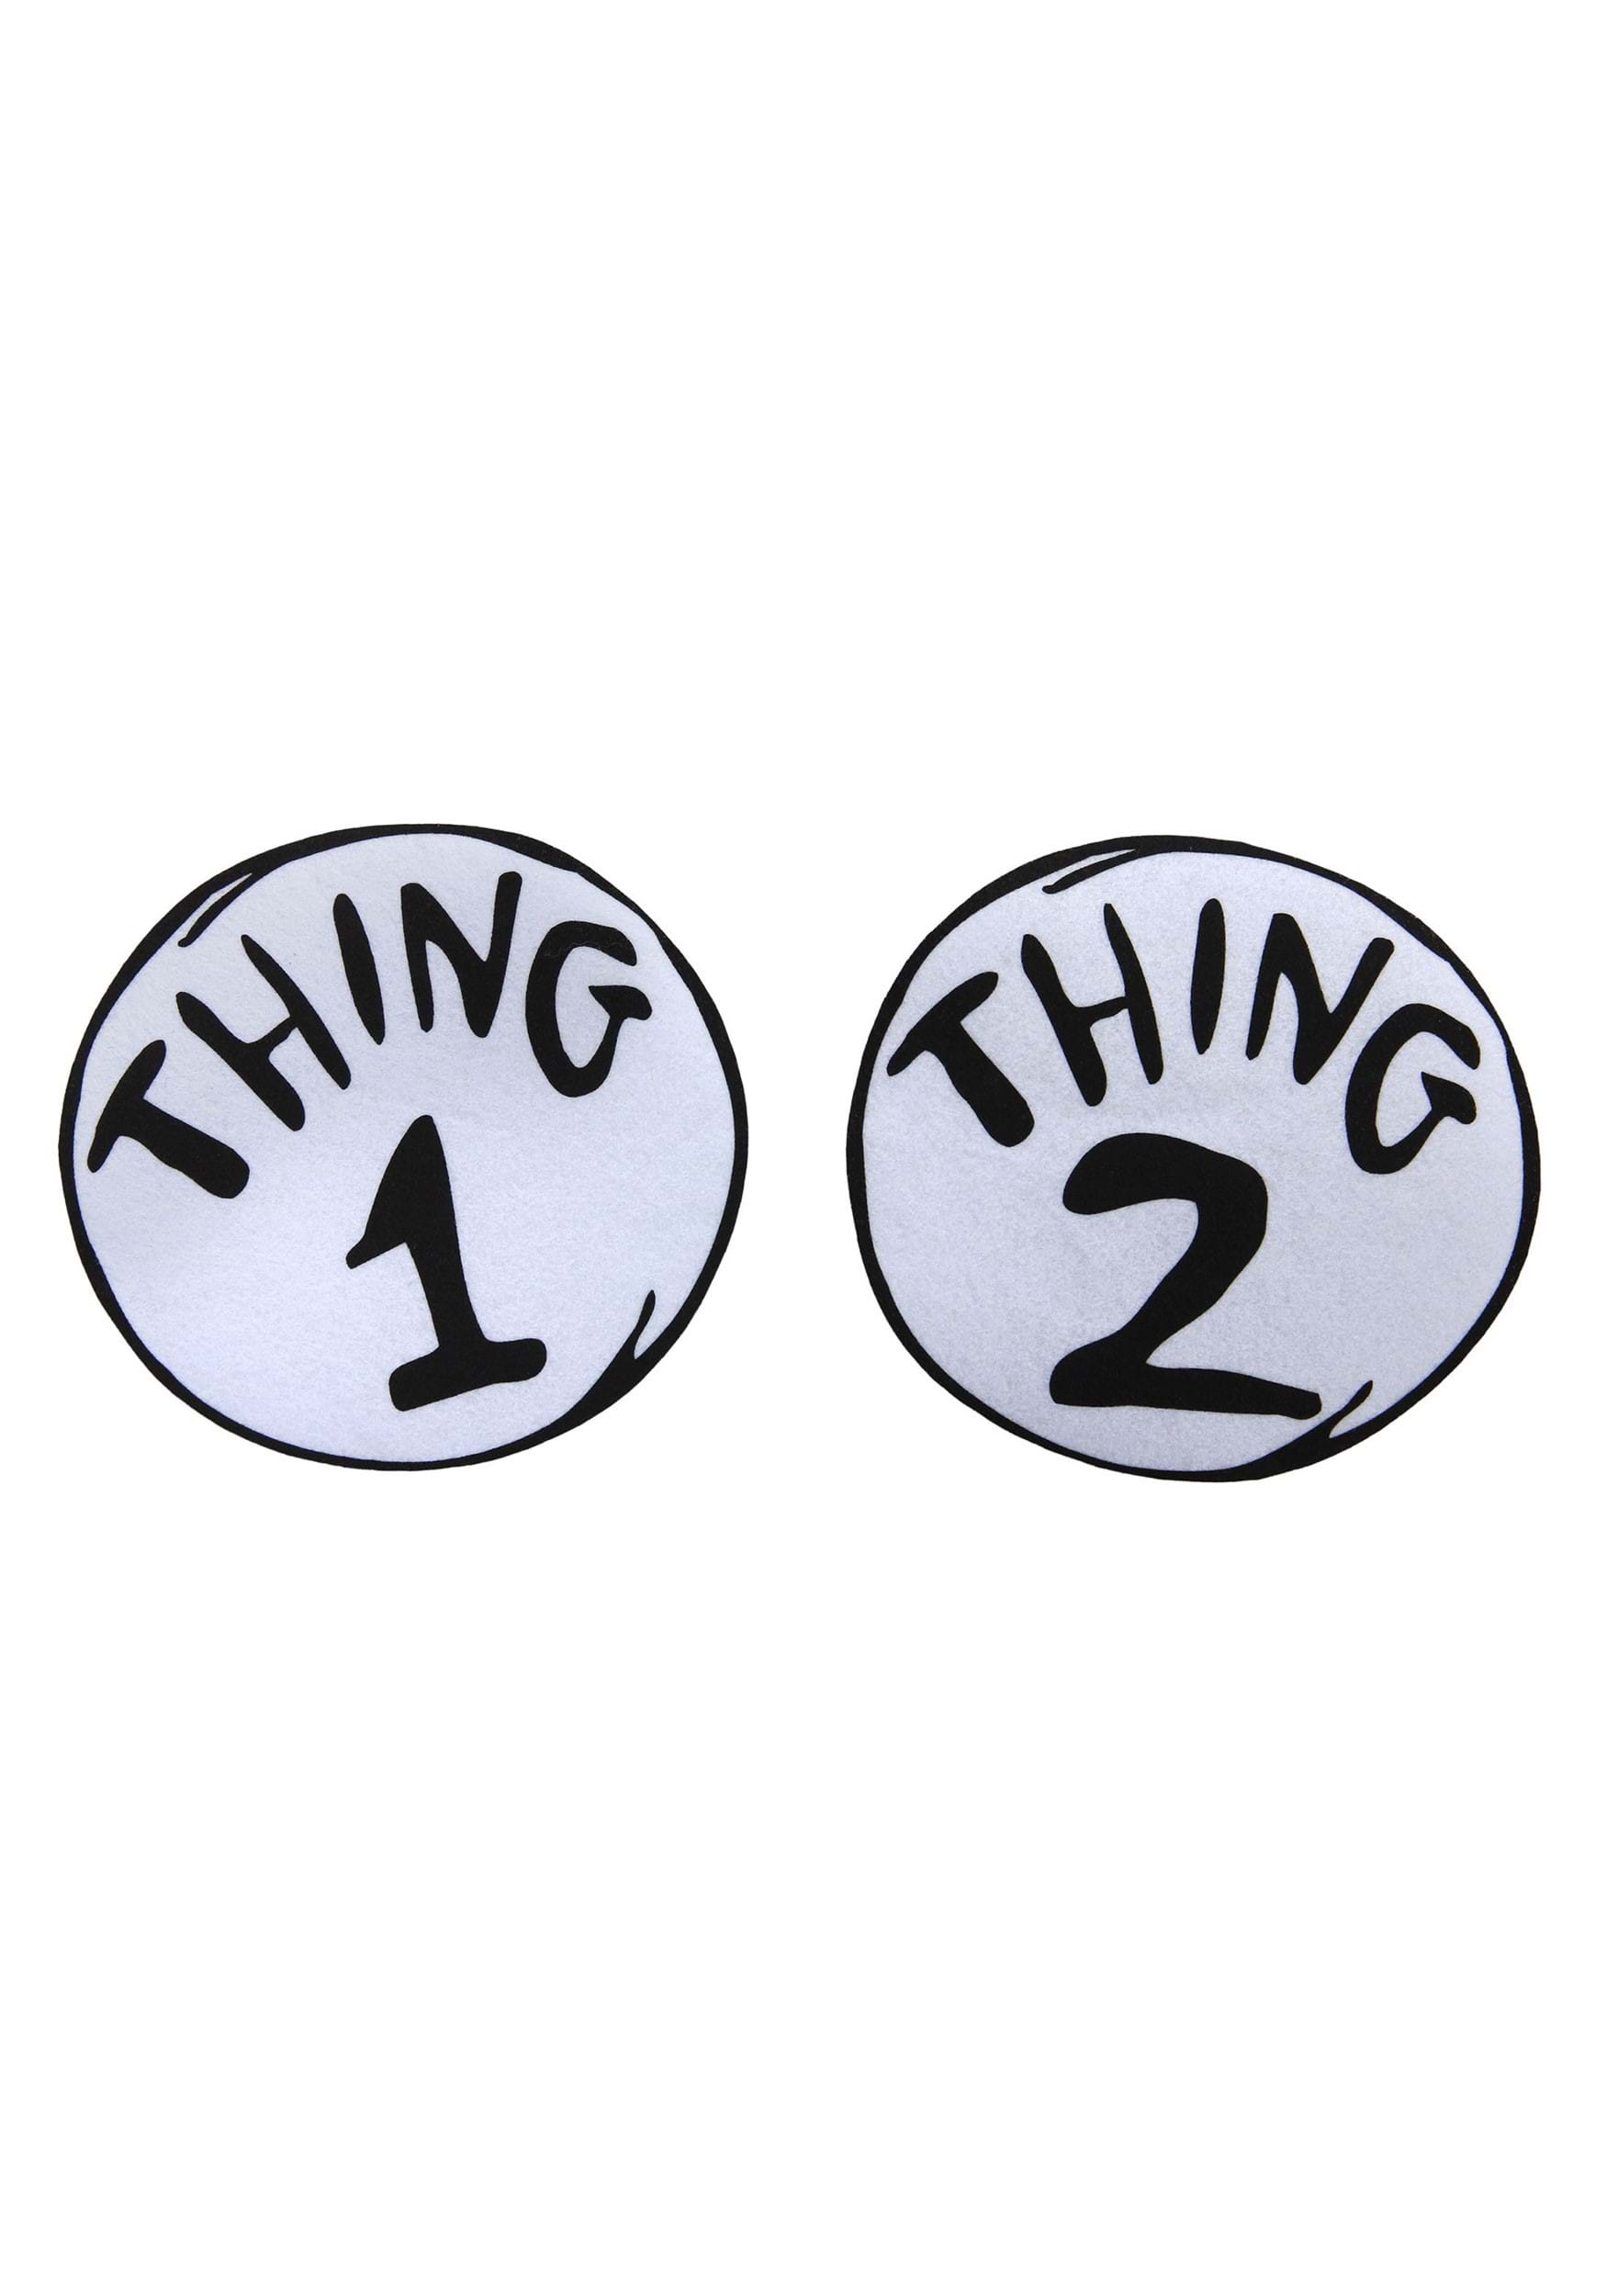 Thing 1 & 2 Large The Cat in the Hat Patches Set